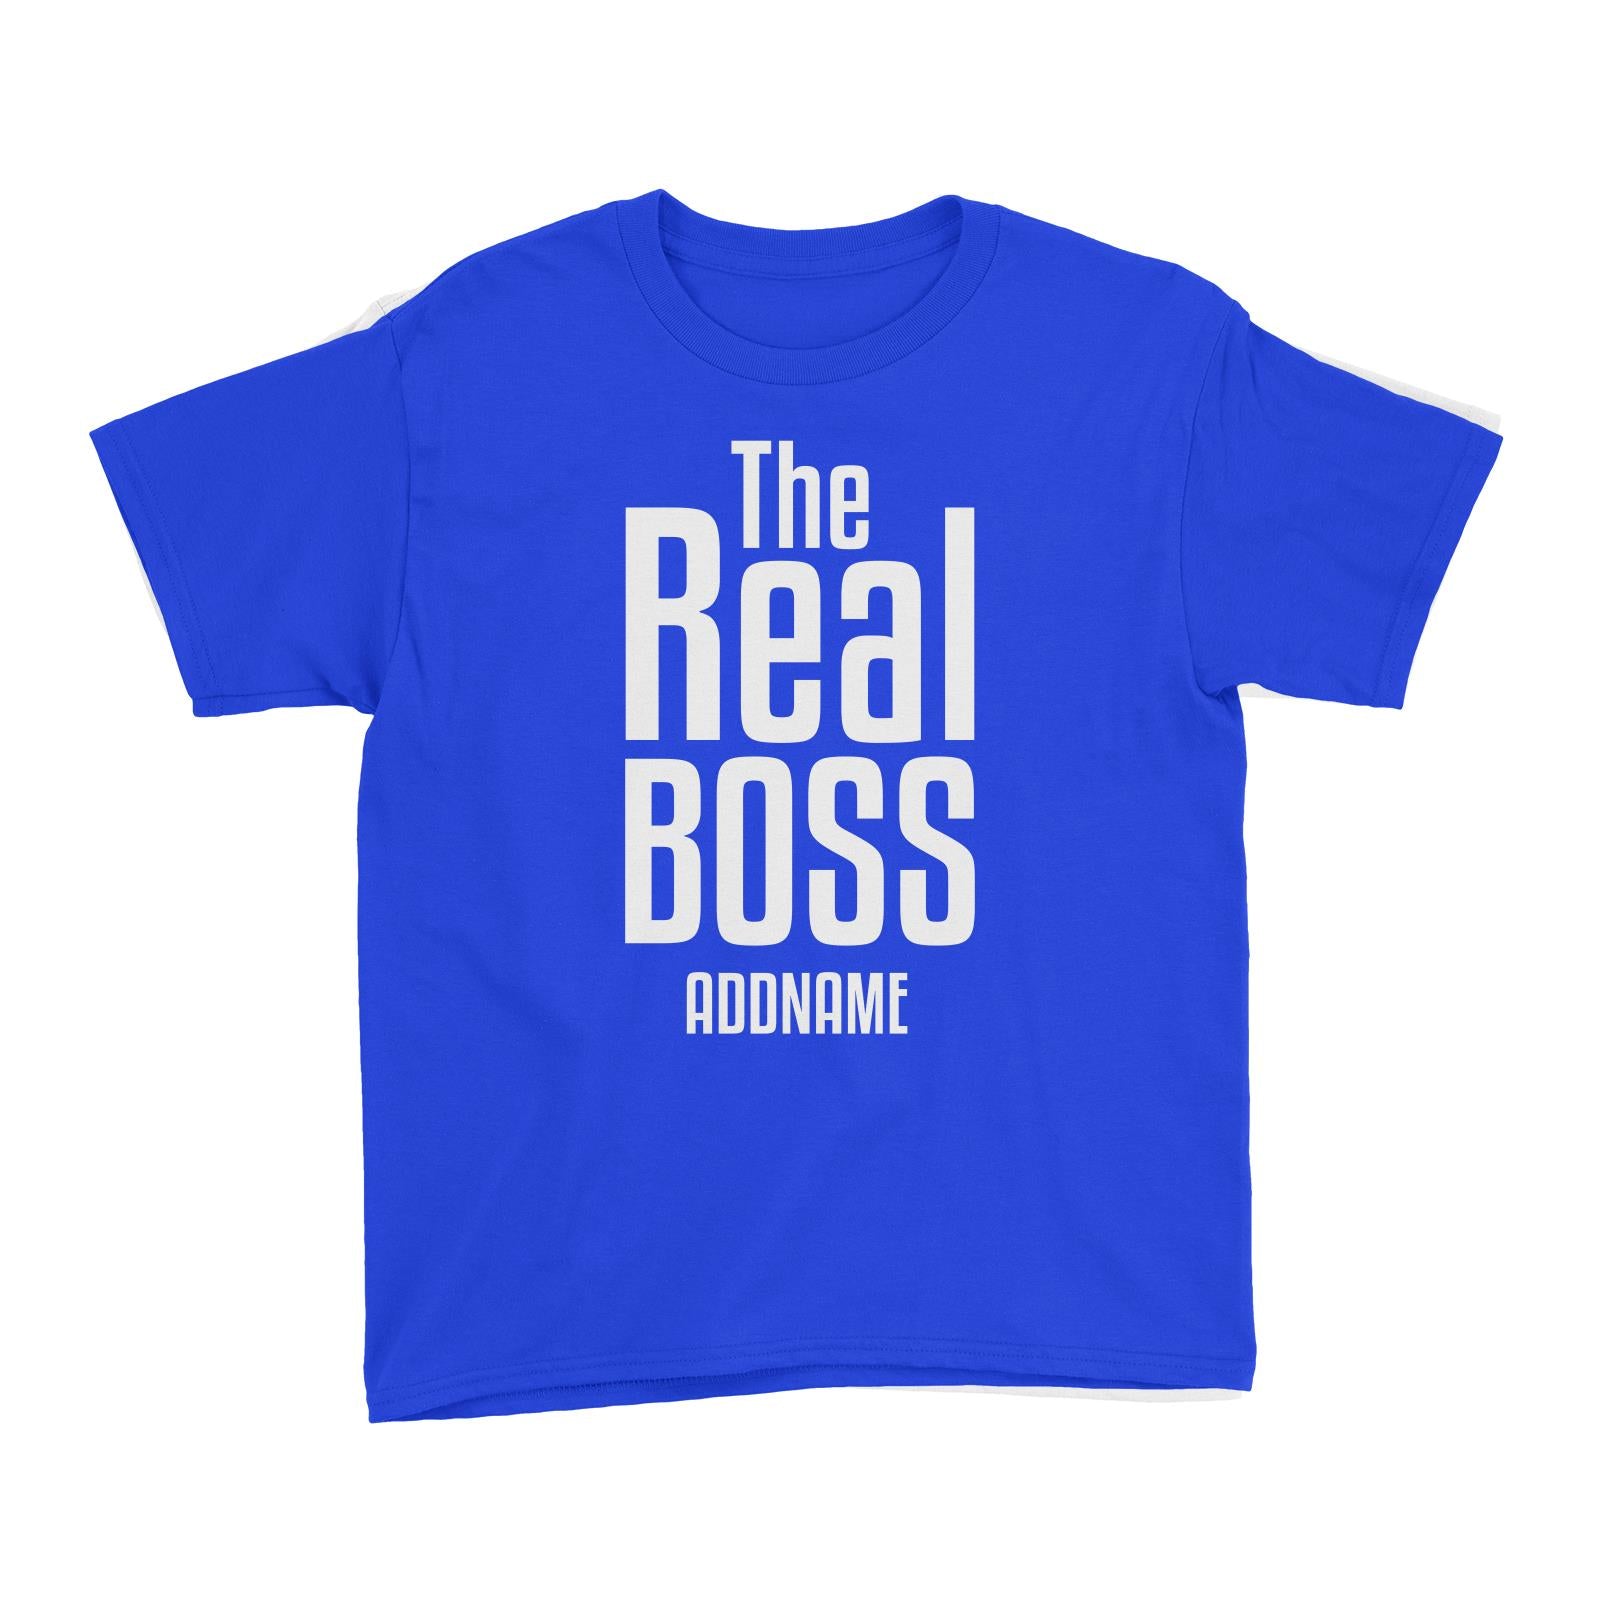 The Real Boss Kid's T-Shirt